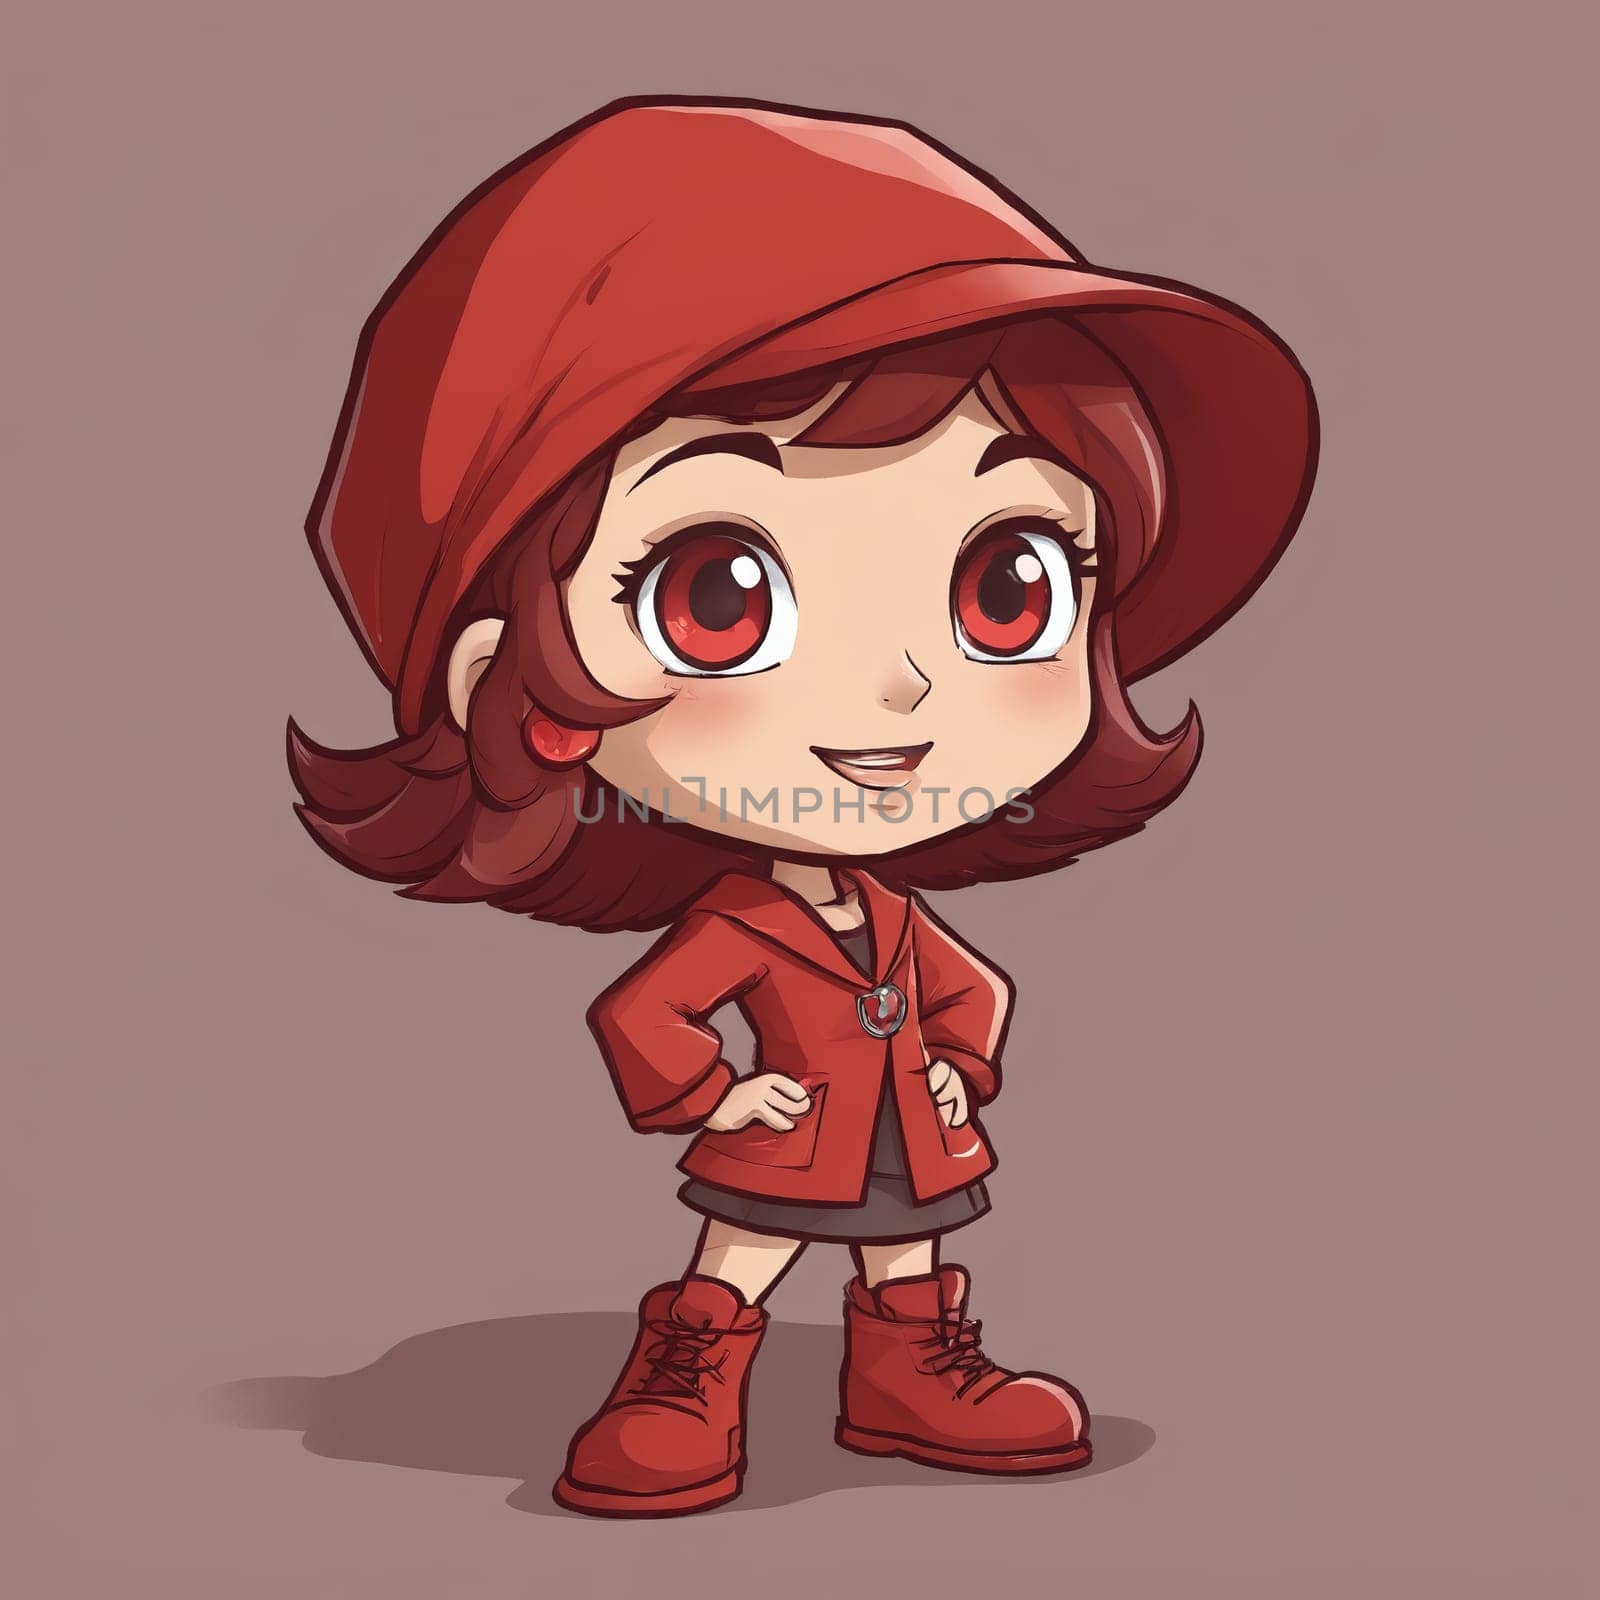 A character dons an all-red ensemble, complete with a flamboyant hat and boots.